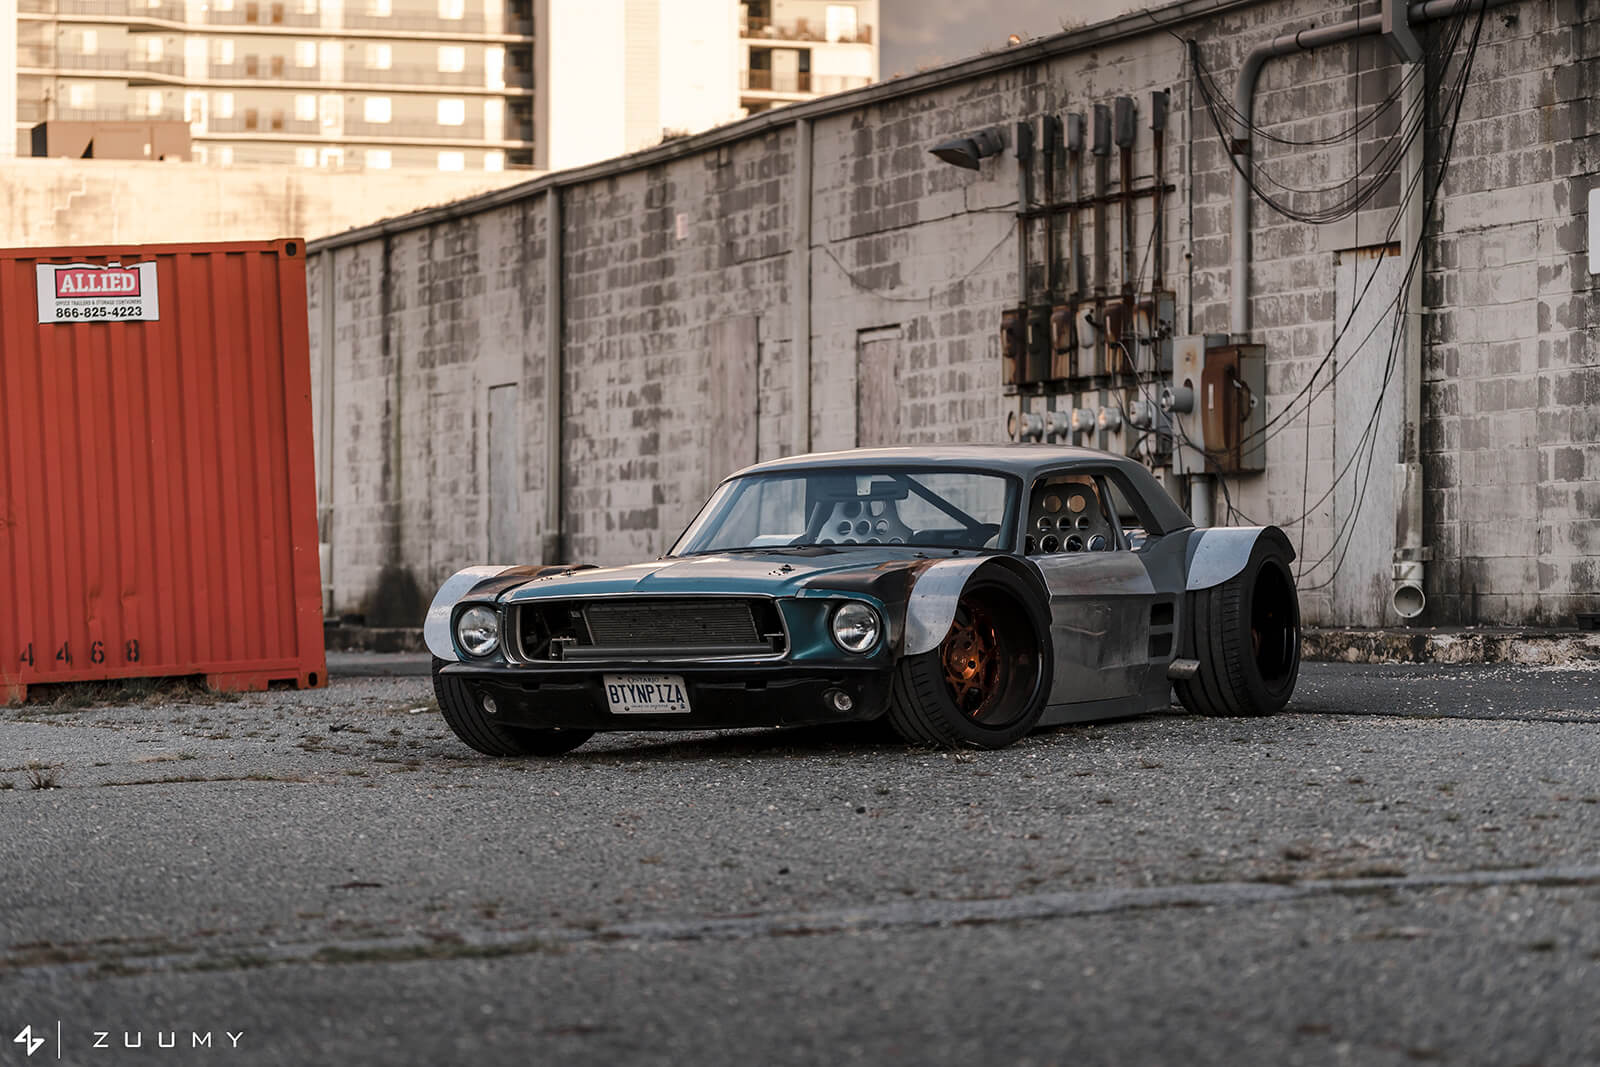 Mustang Ford 1967 Corvette C5 Ls Swap mad max Kyle Scaife